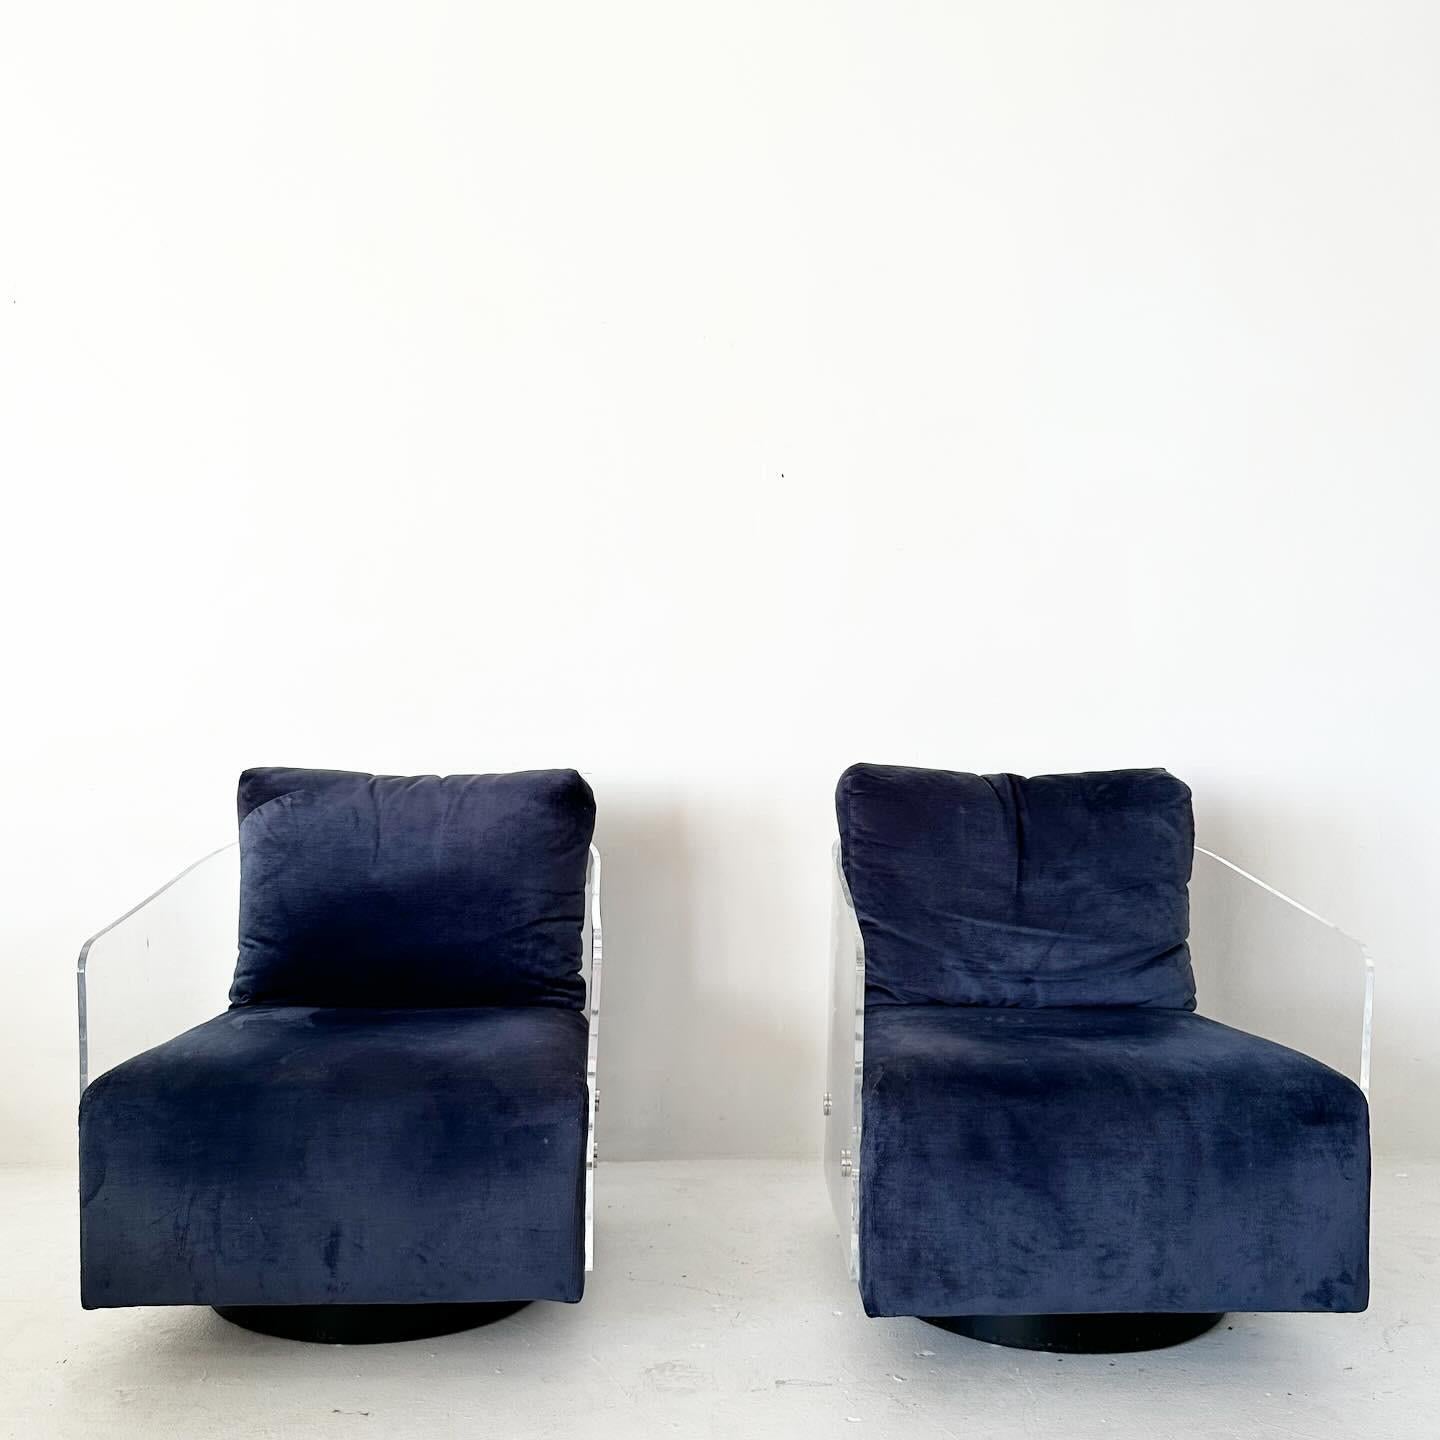 Pair of blue velvet Mitchell Gold & Bob Williams Lucite Lucy Swivel Blue Club Lounge Chairs. Purchased from original owner in an estate sale.

1970s inspired, made in early 2000s. Very well constructed and comfy.

Inquire if you are interested in